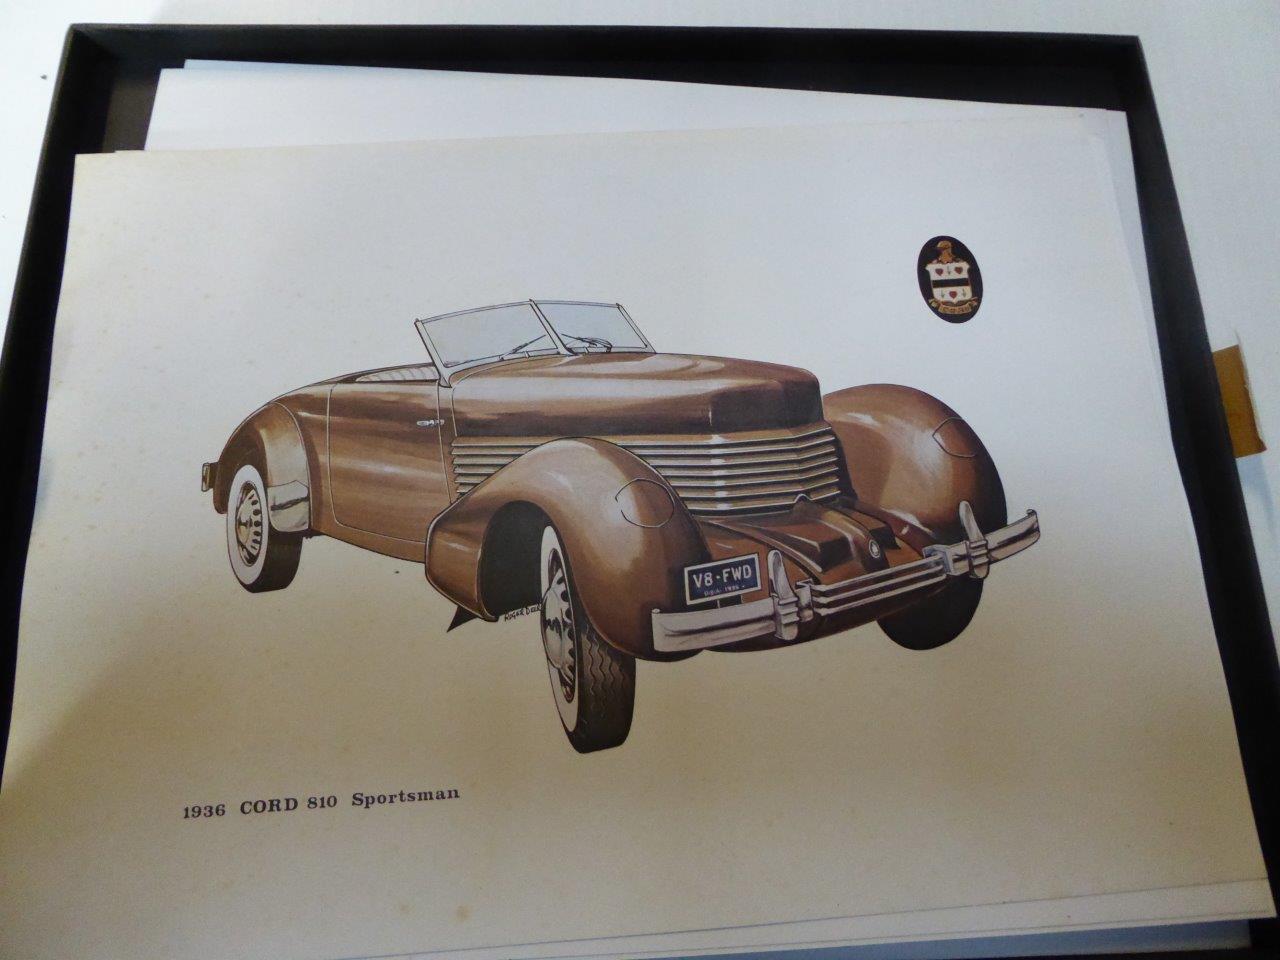 Approximately 50 boxed lithographs of a 1936 Cord 810 Sportsman